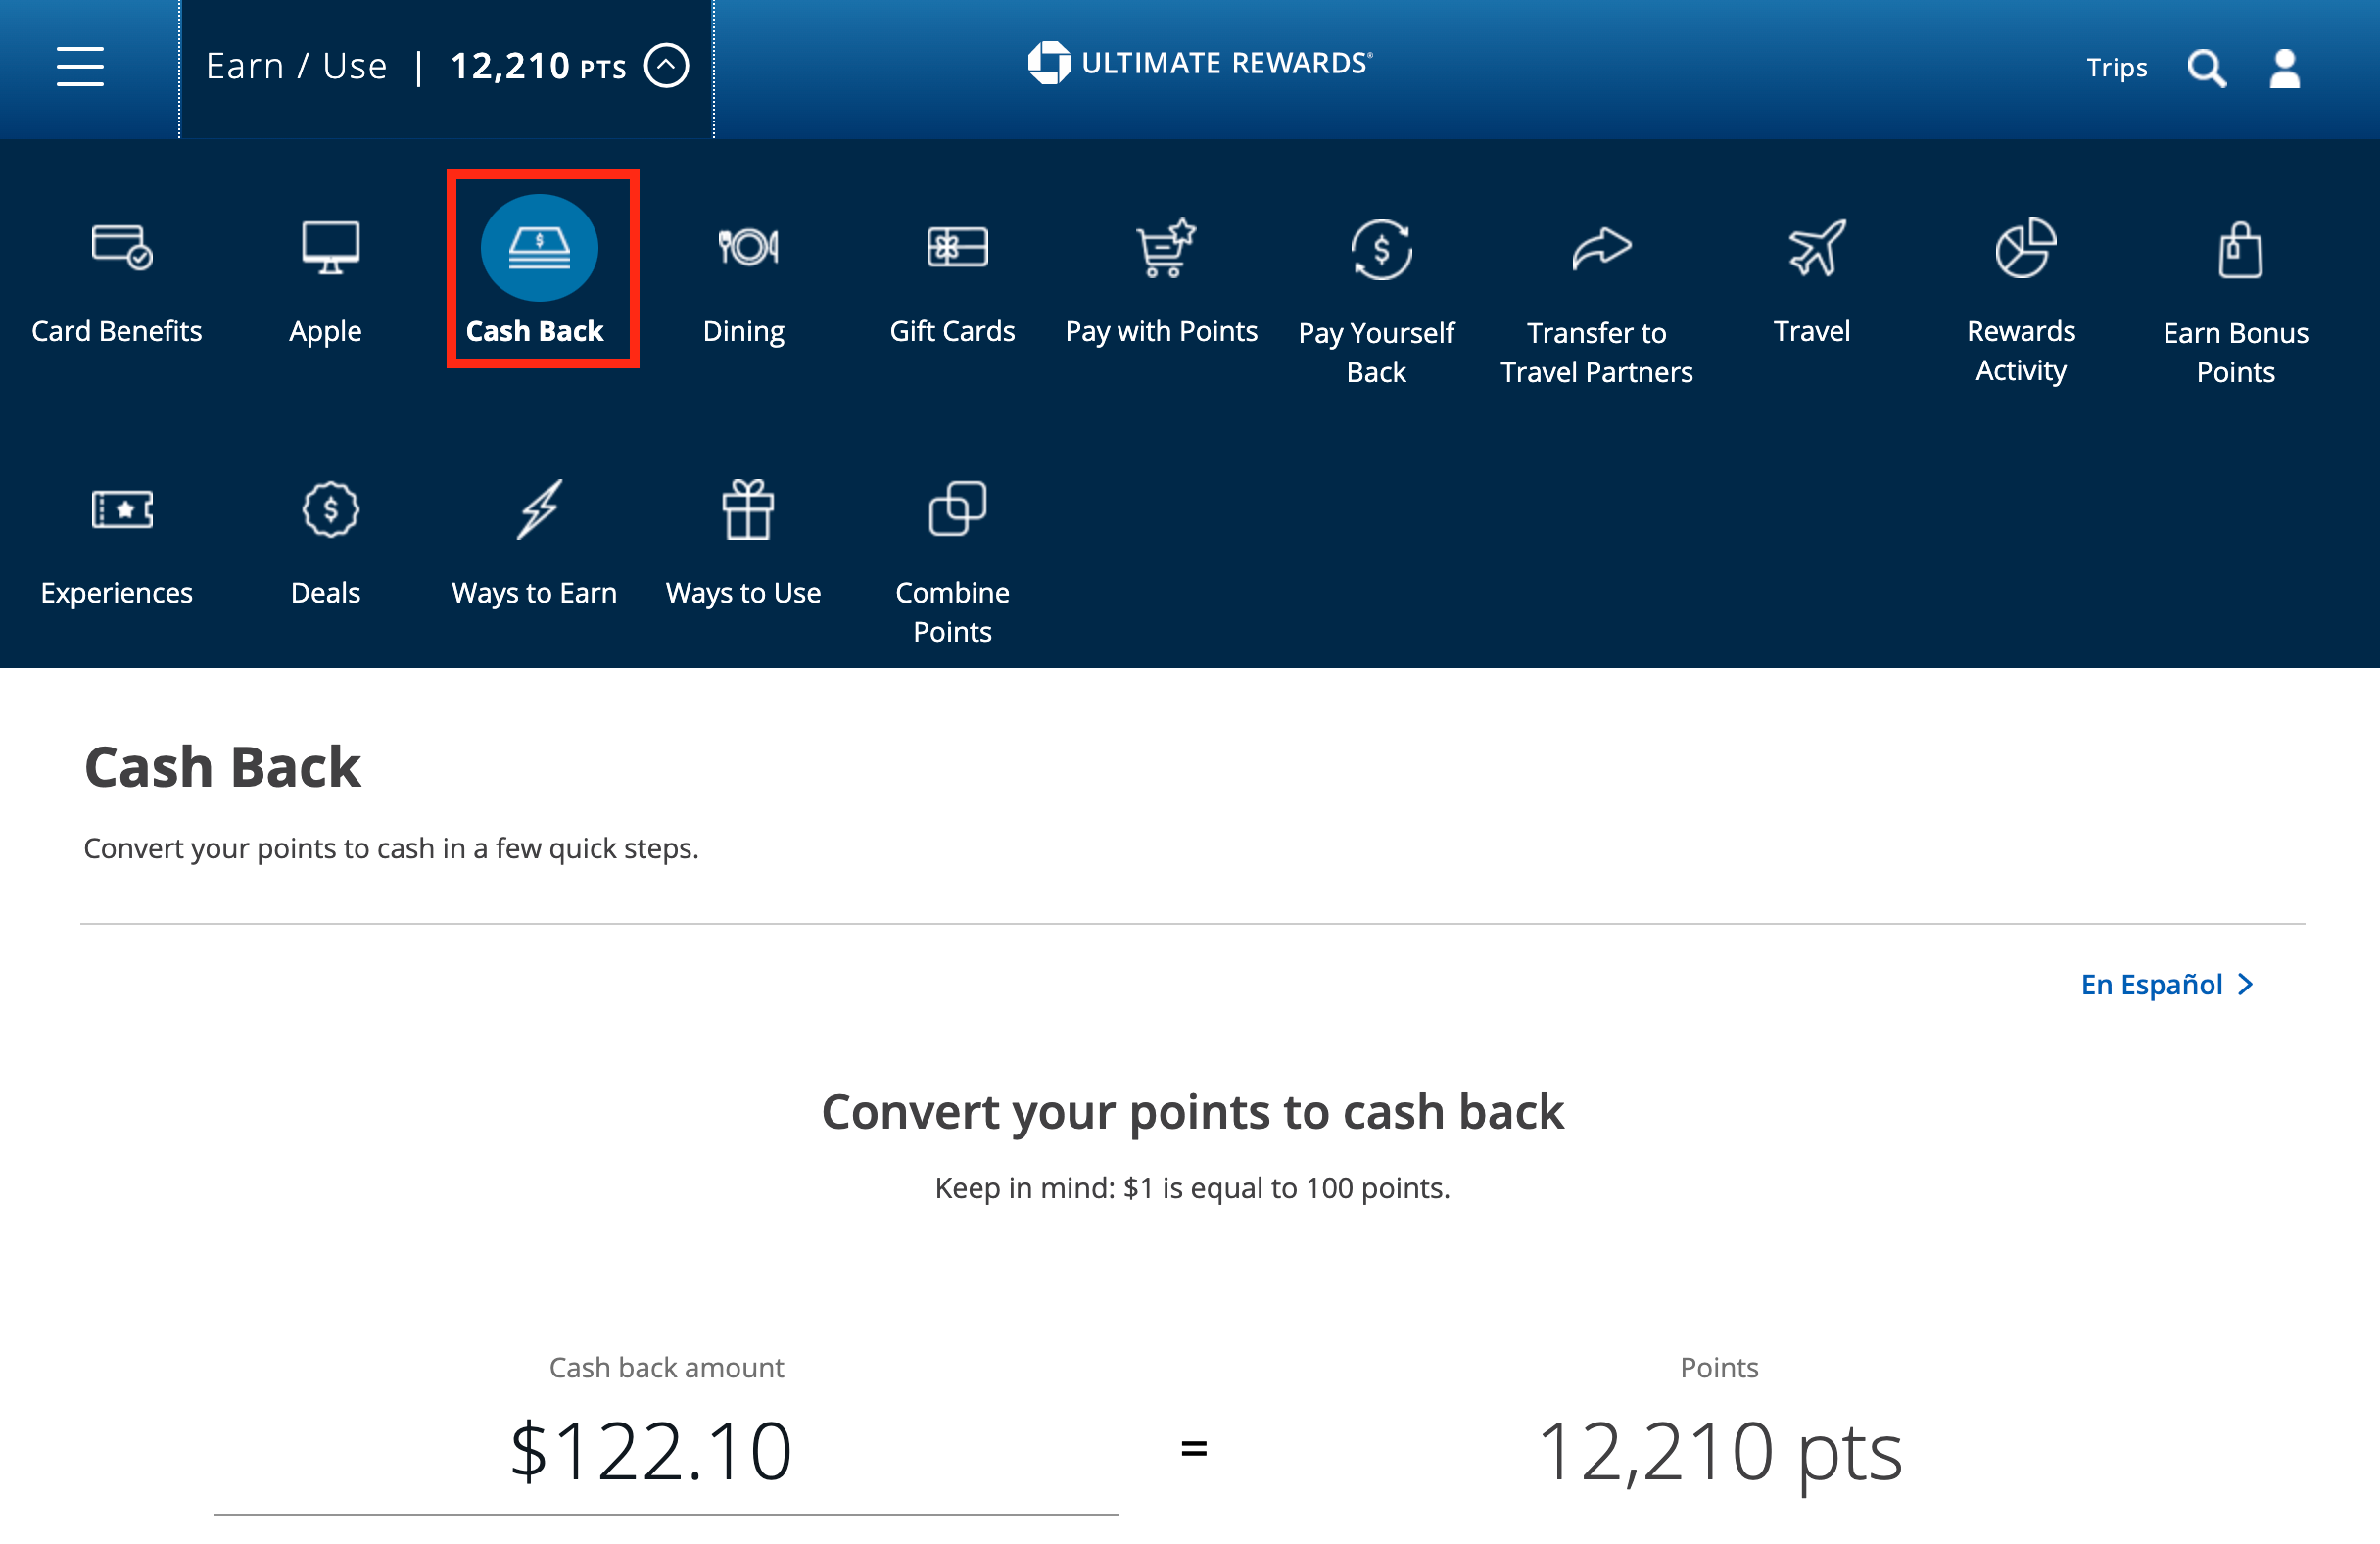 The Case for Booking Flights with Chase Ultimate Rewards Points